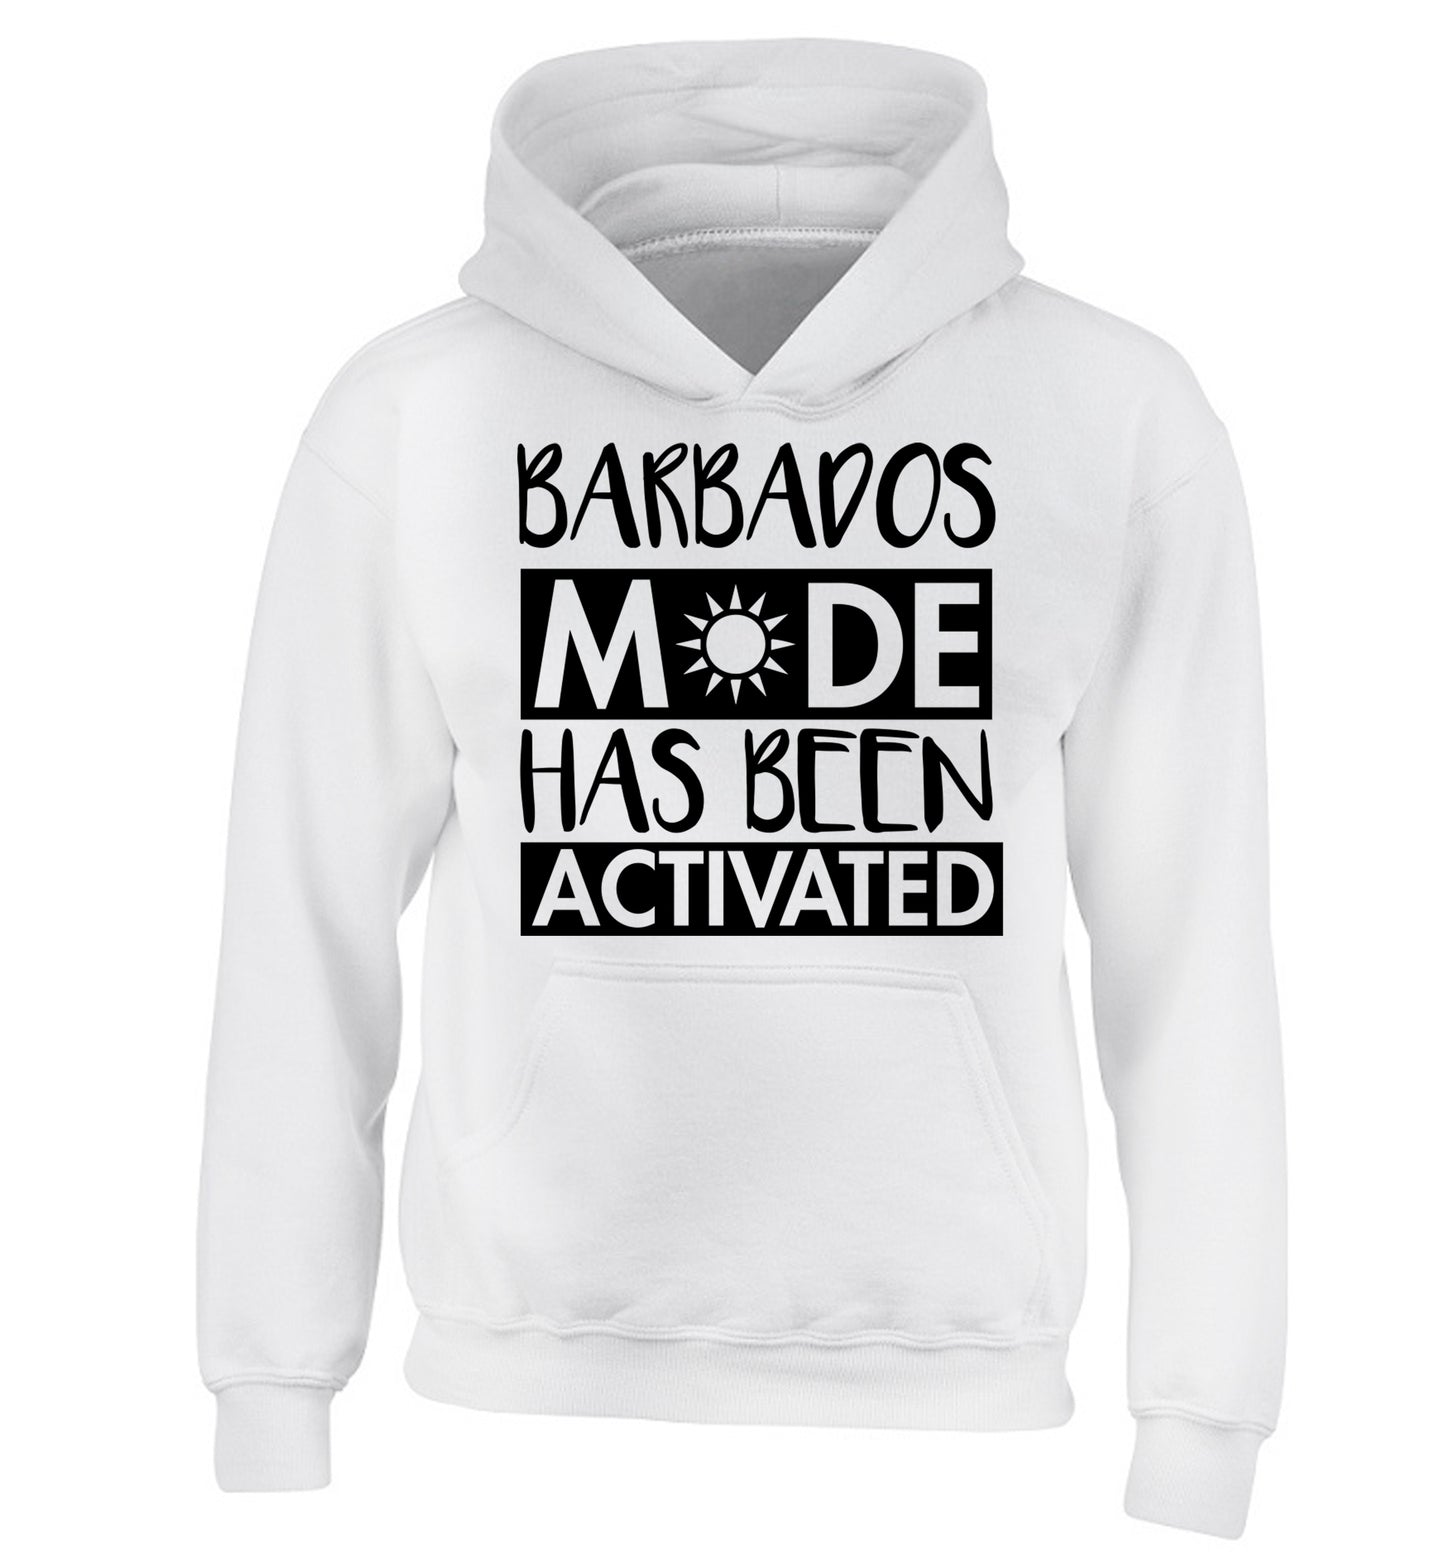 Barbados mode has been activated children's white hoodie 12-13 Years